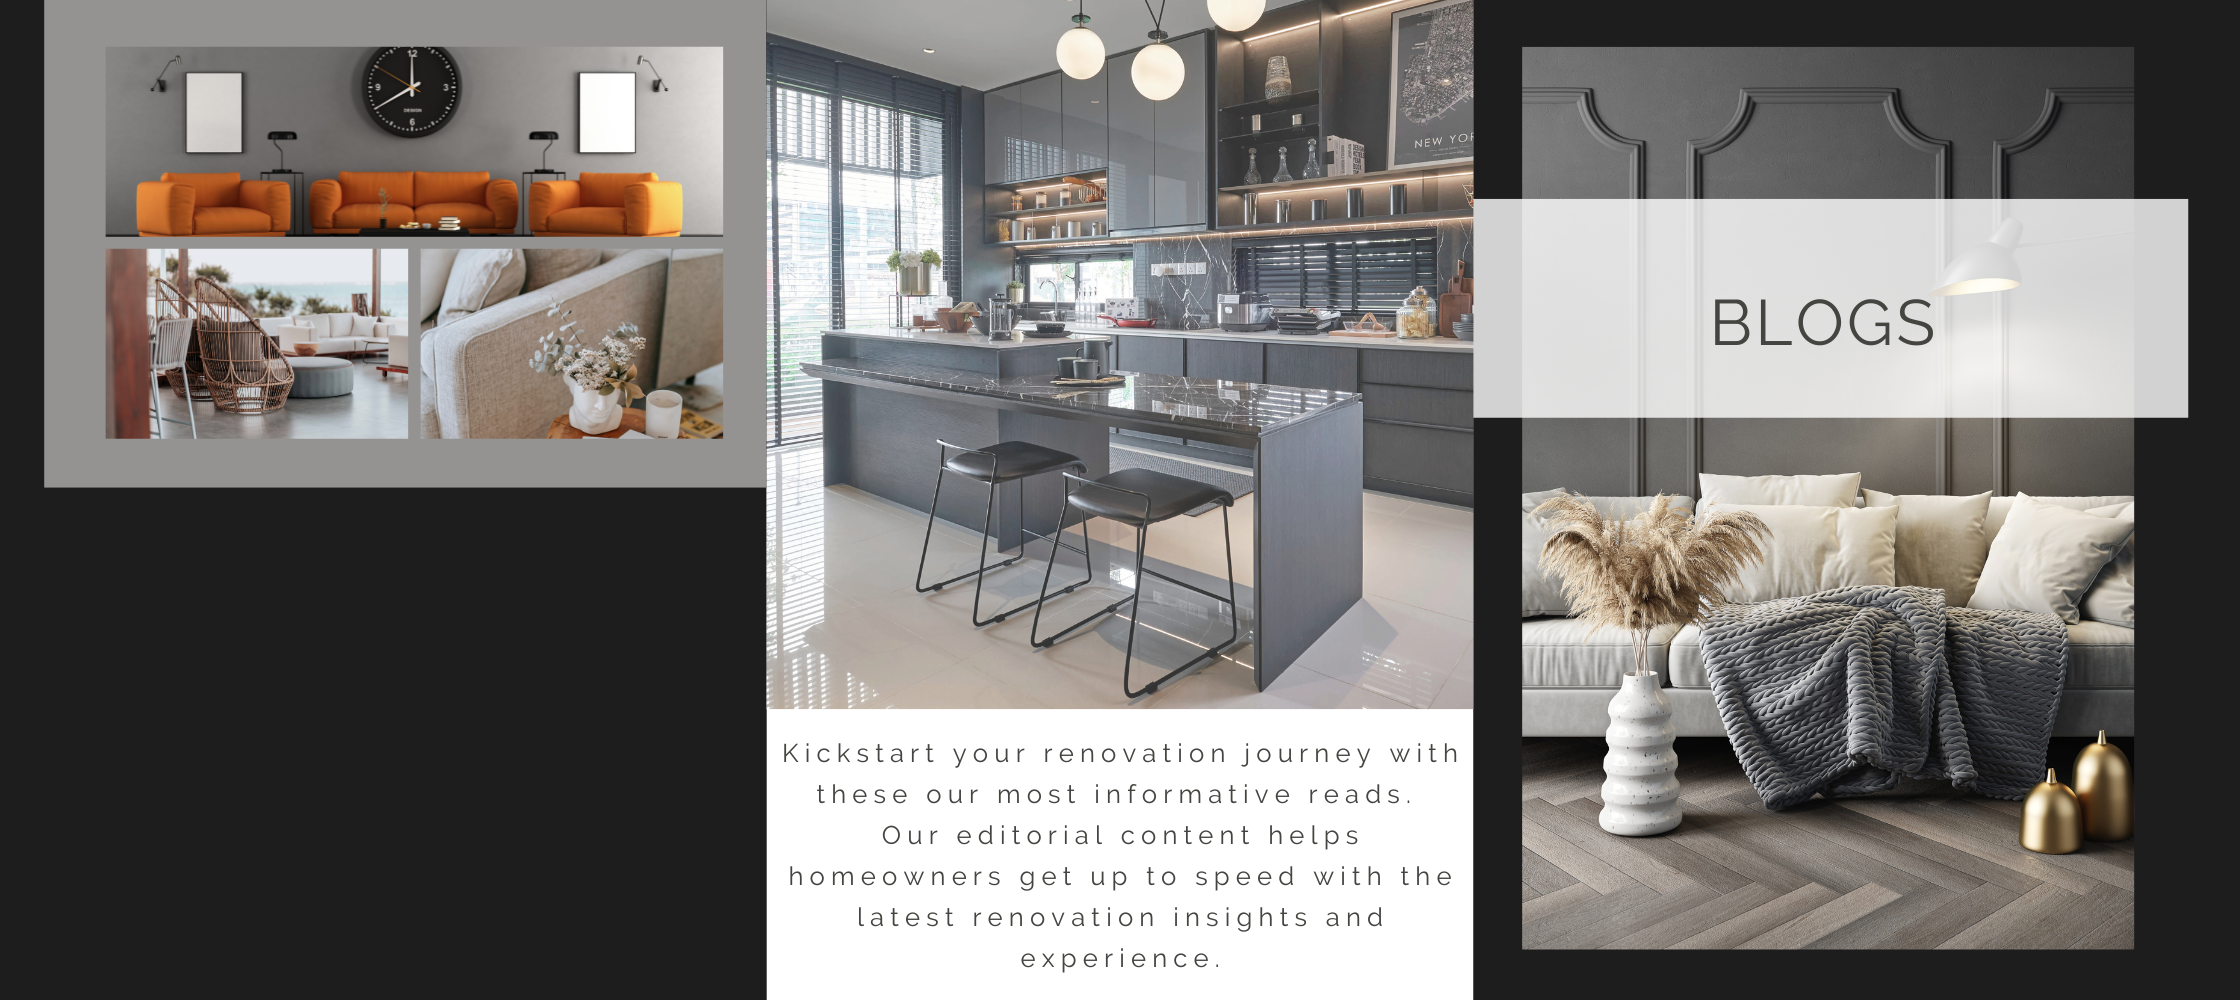 Kickstart your renovation journey with these our most informative reads. Our editorial content helps homeowners get up to speed with the latest renovation insights and experience.